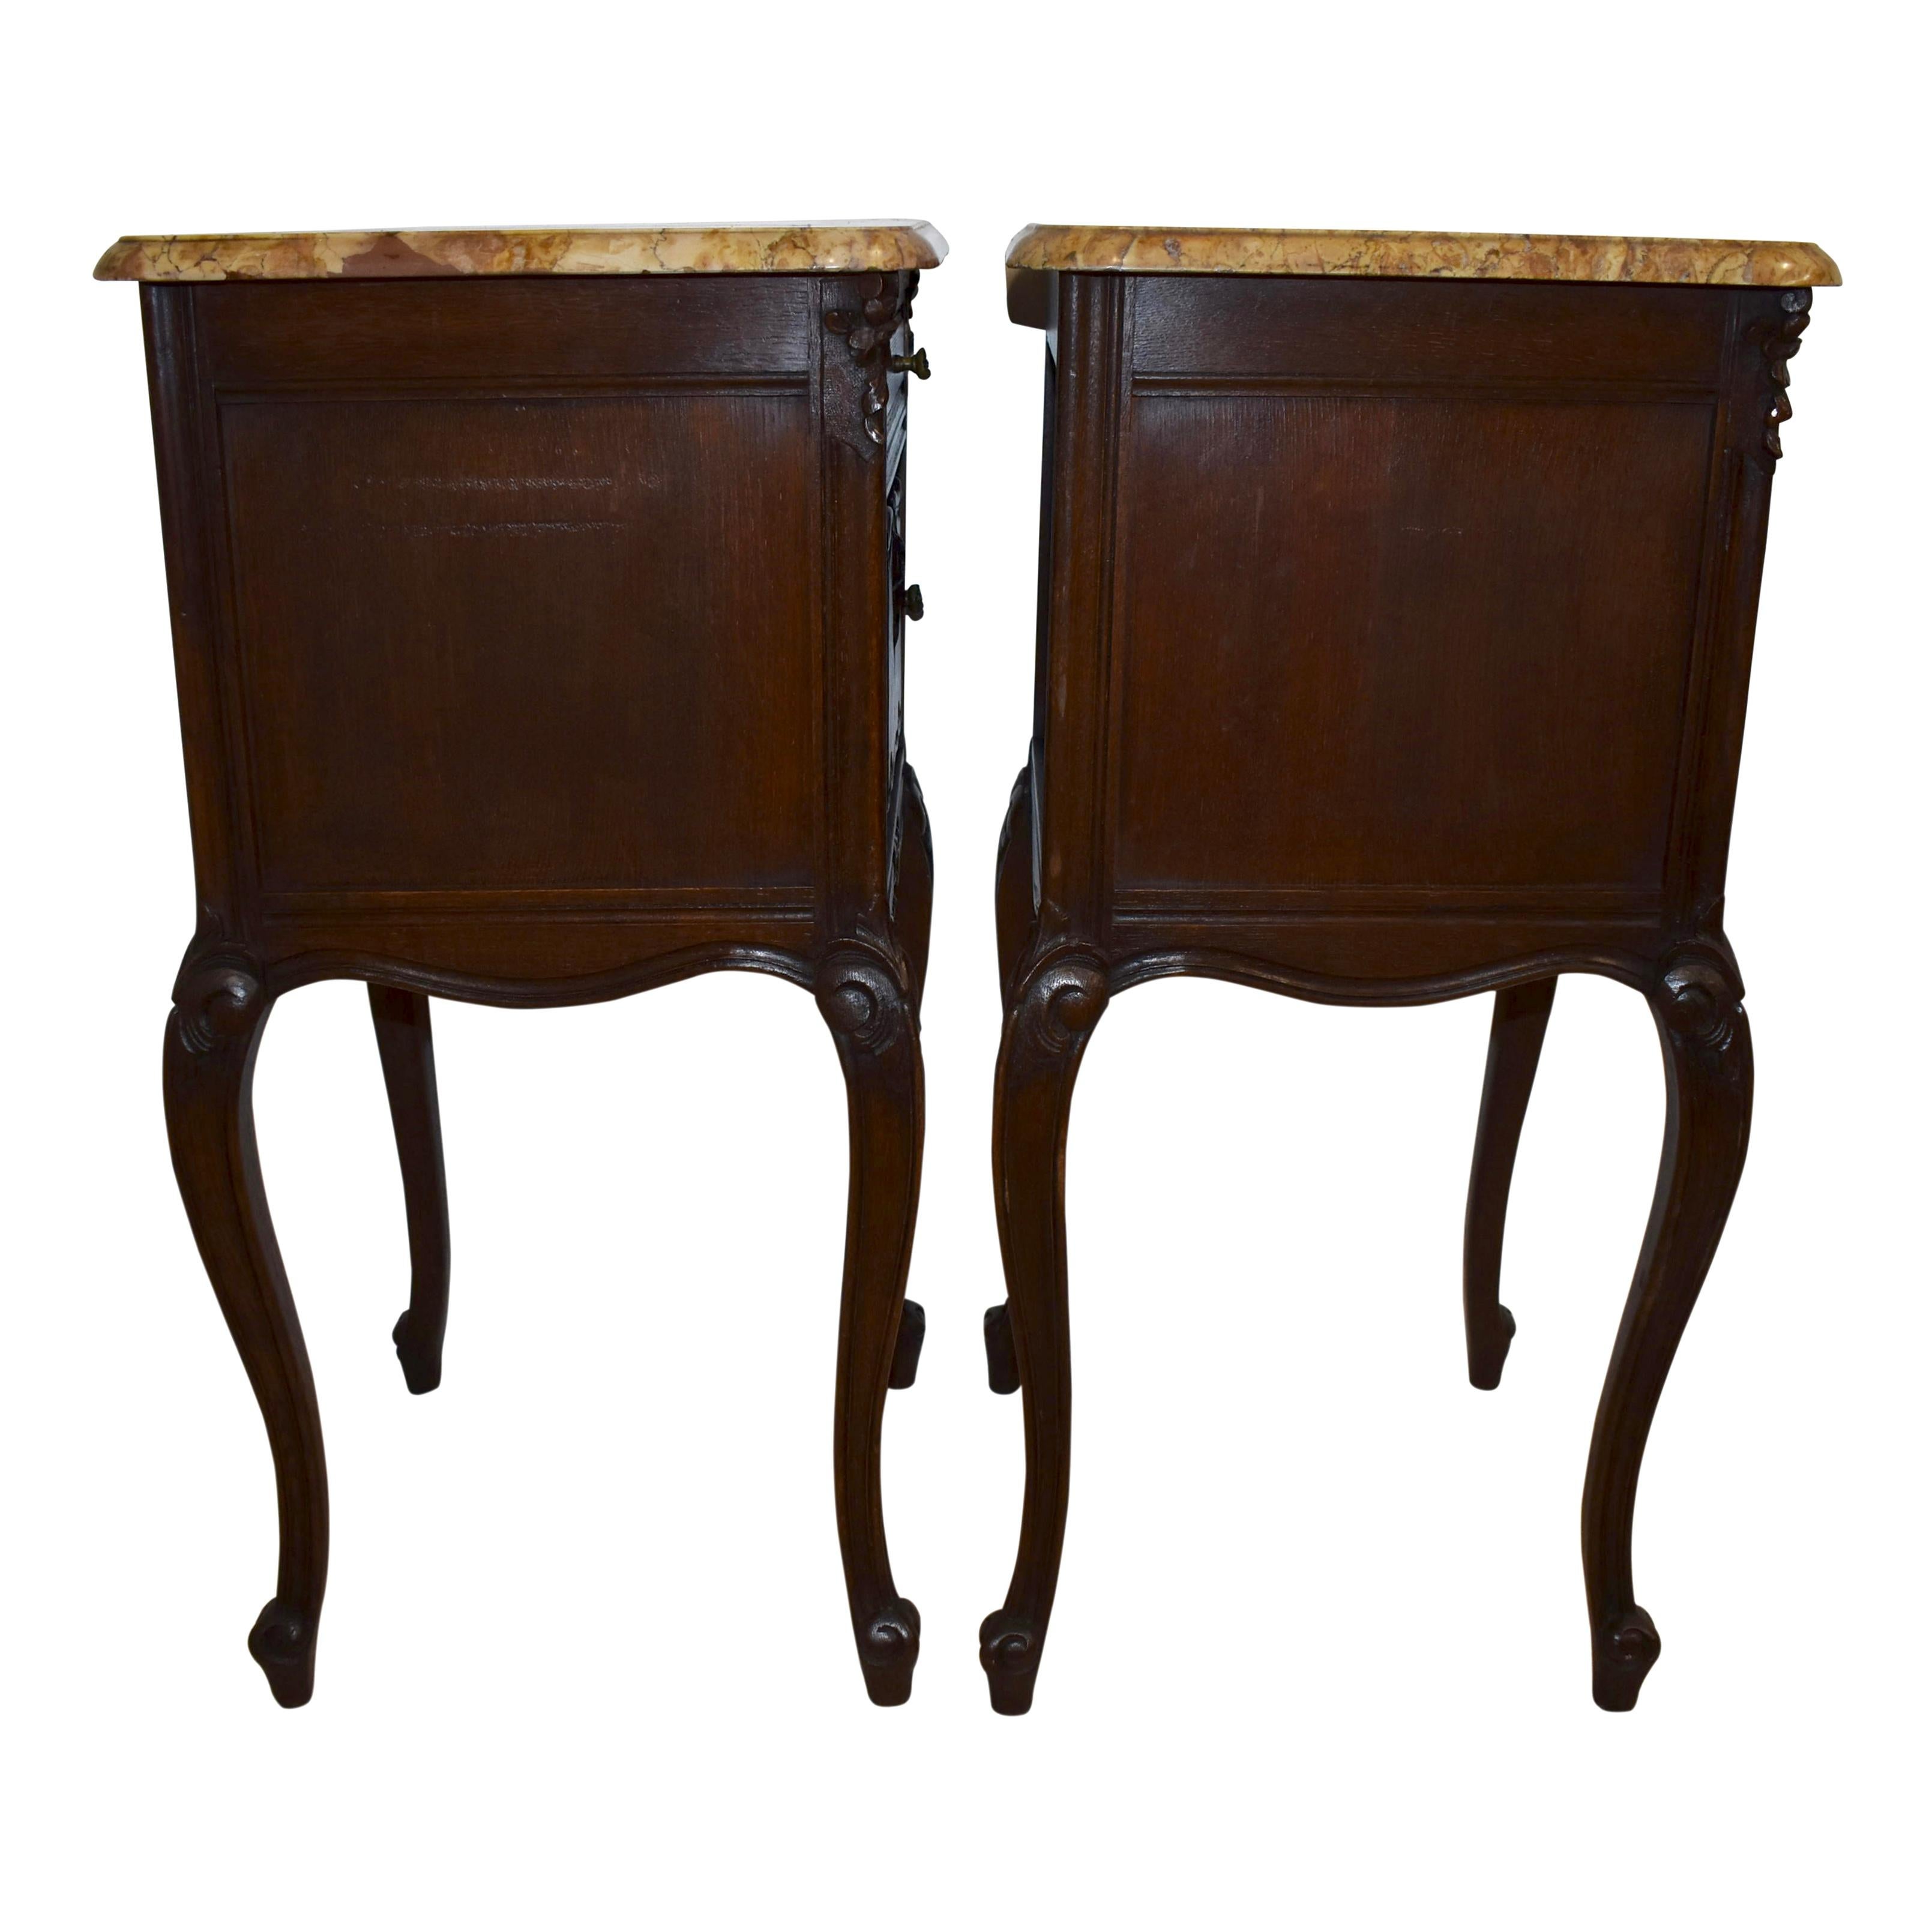 Pair of Carved Oak Nightstand Bedside Tables with Mable Tops, Circa 1900 For Sale 4